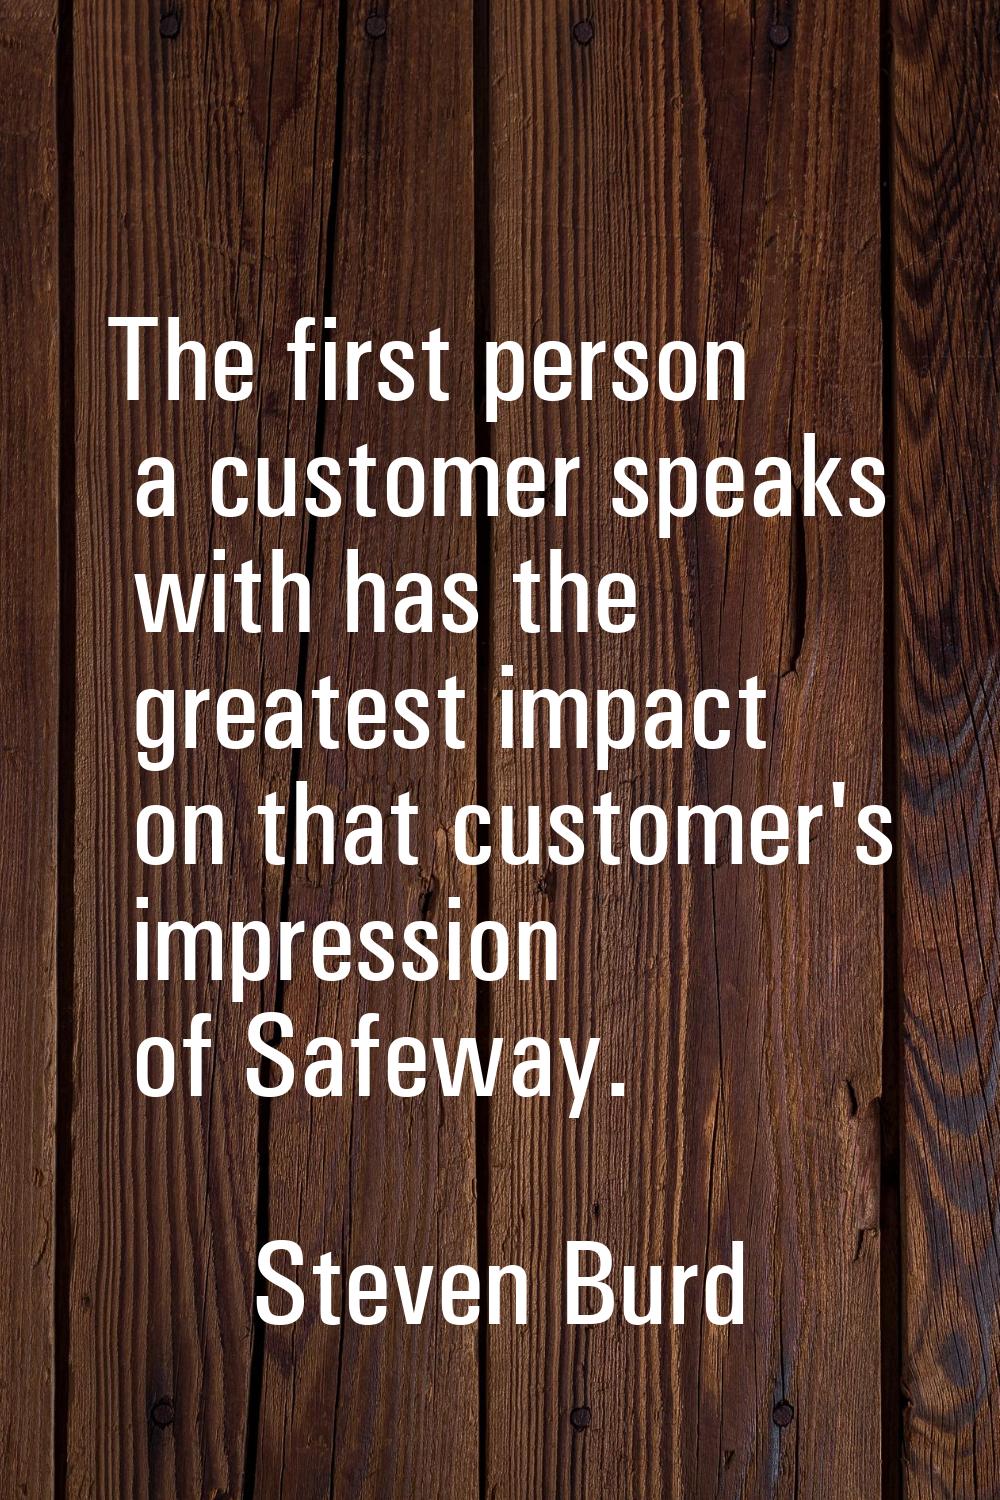 The first person a customer speaks with has the greatest impact on that customer's impression of Sa